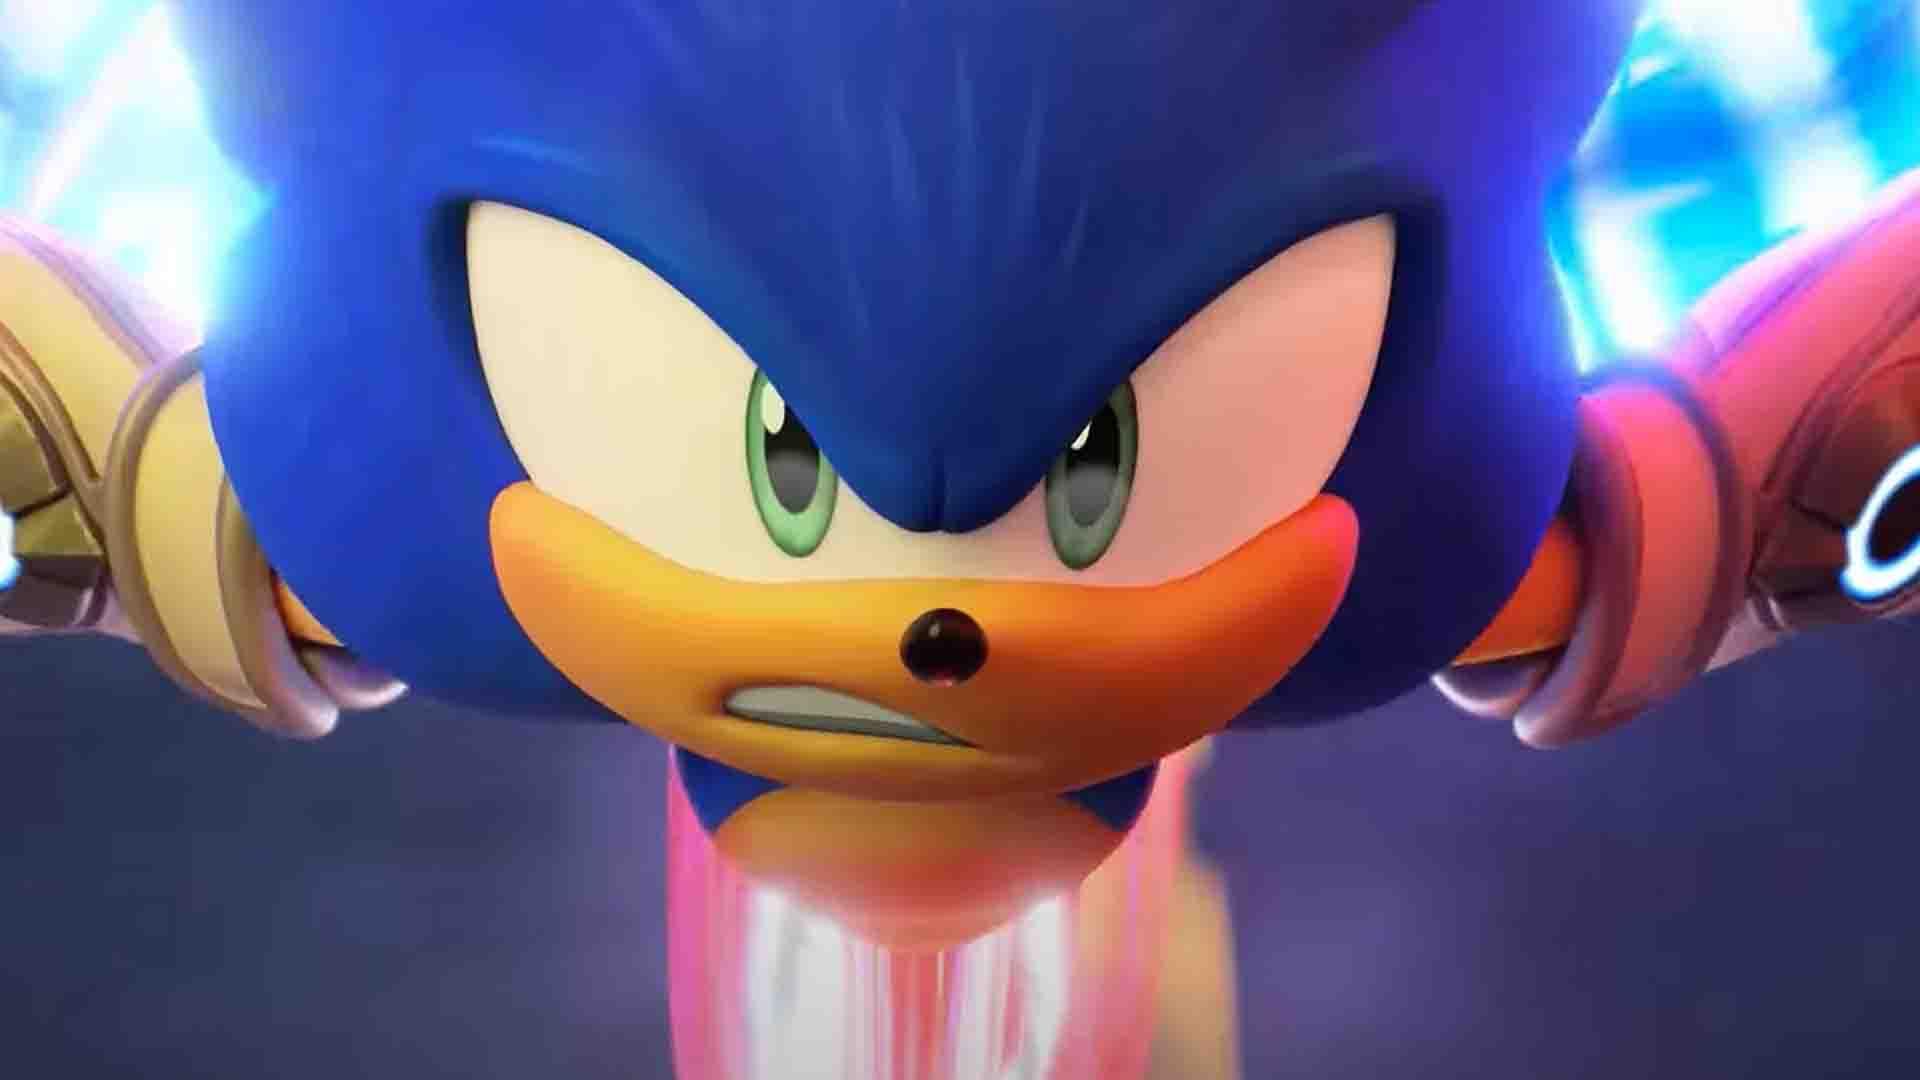 Shadow the Hedgehog Voice - Sonic Boom (TV Show) - Behind The